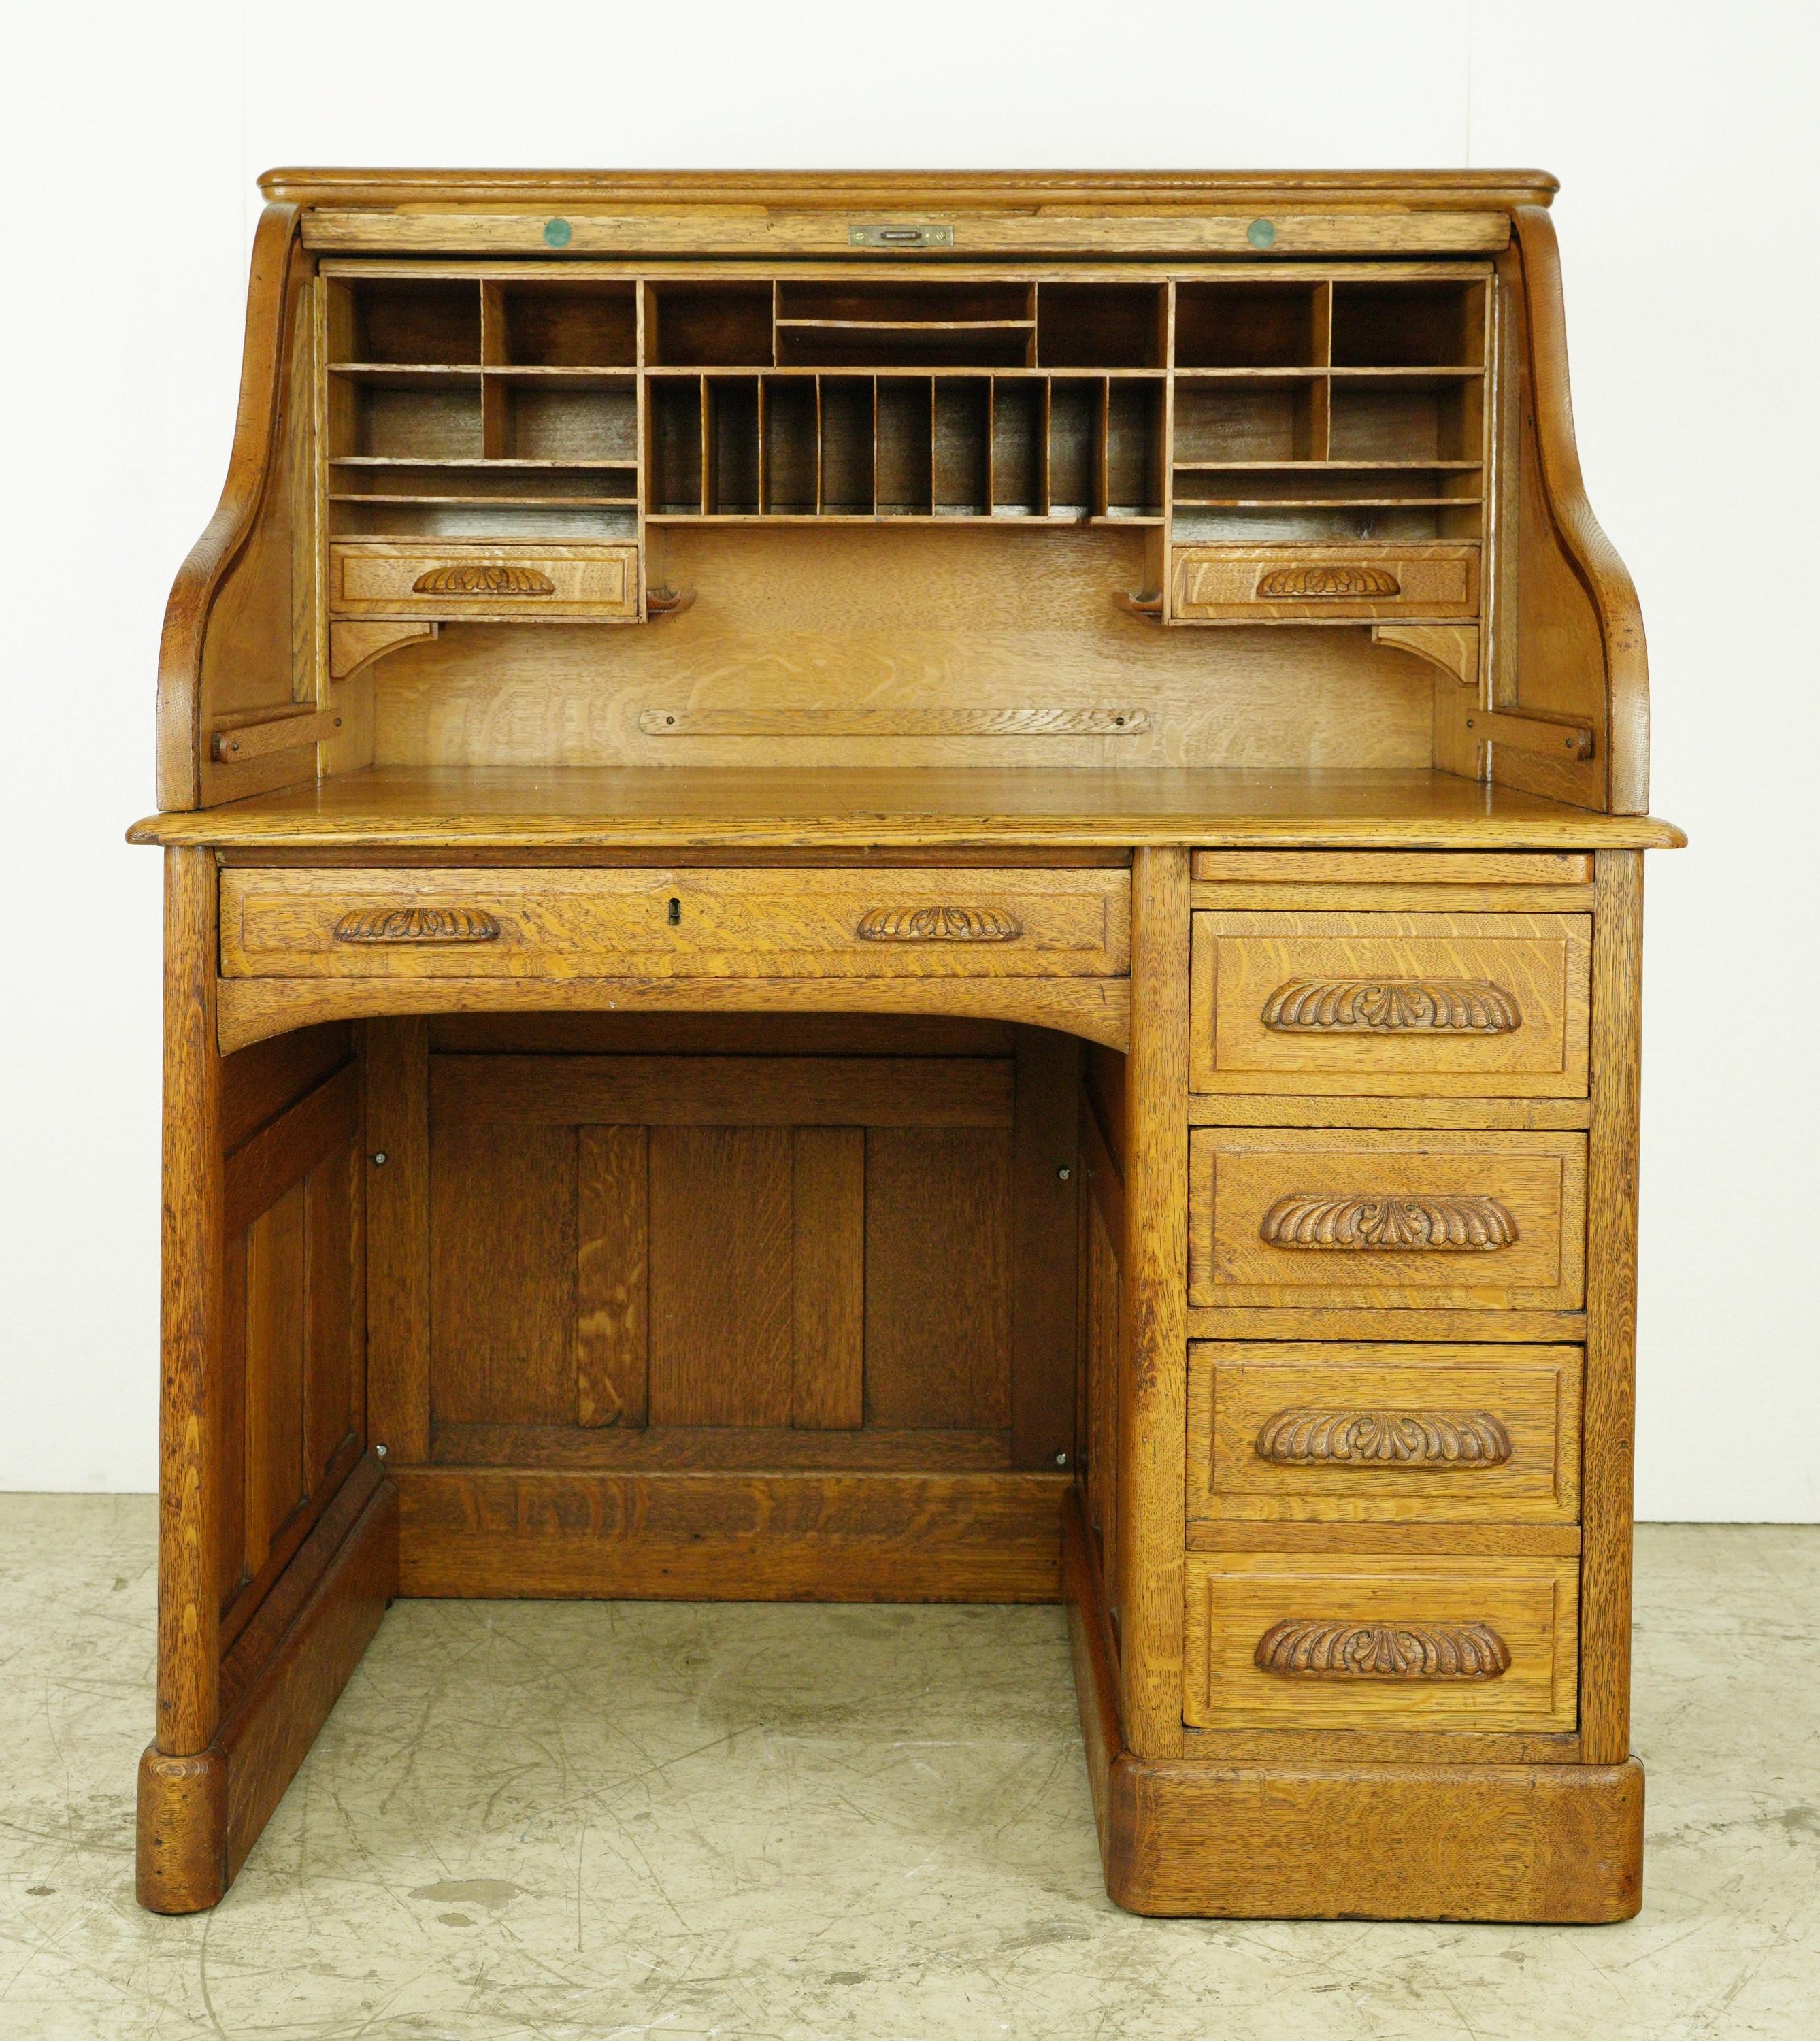 Medium tone tiger oak roll top desk with drawers on the right side that lock simultaneously to the top and three secret drawers. The roll top locks automatically when closed. Some visible screws on the inner leg area. Some scratches and dings. This